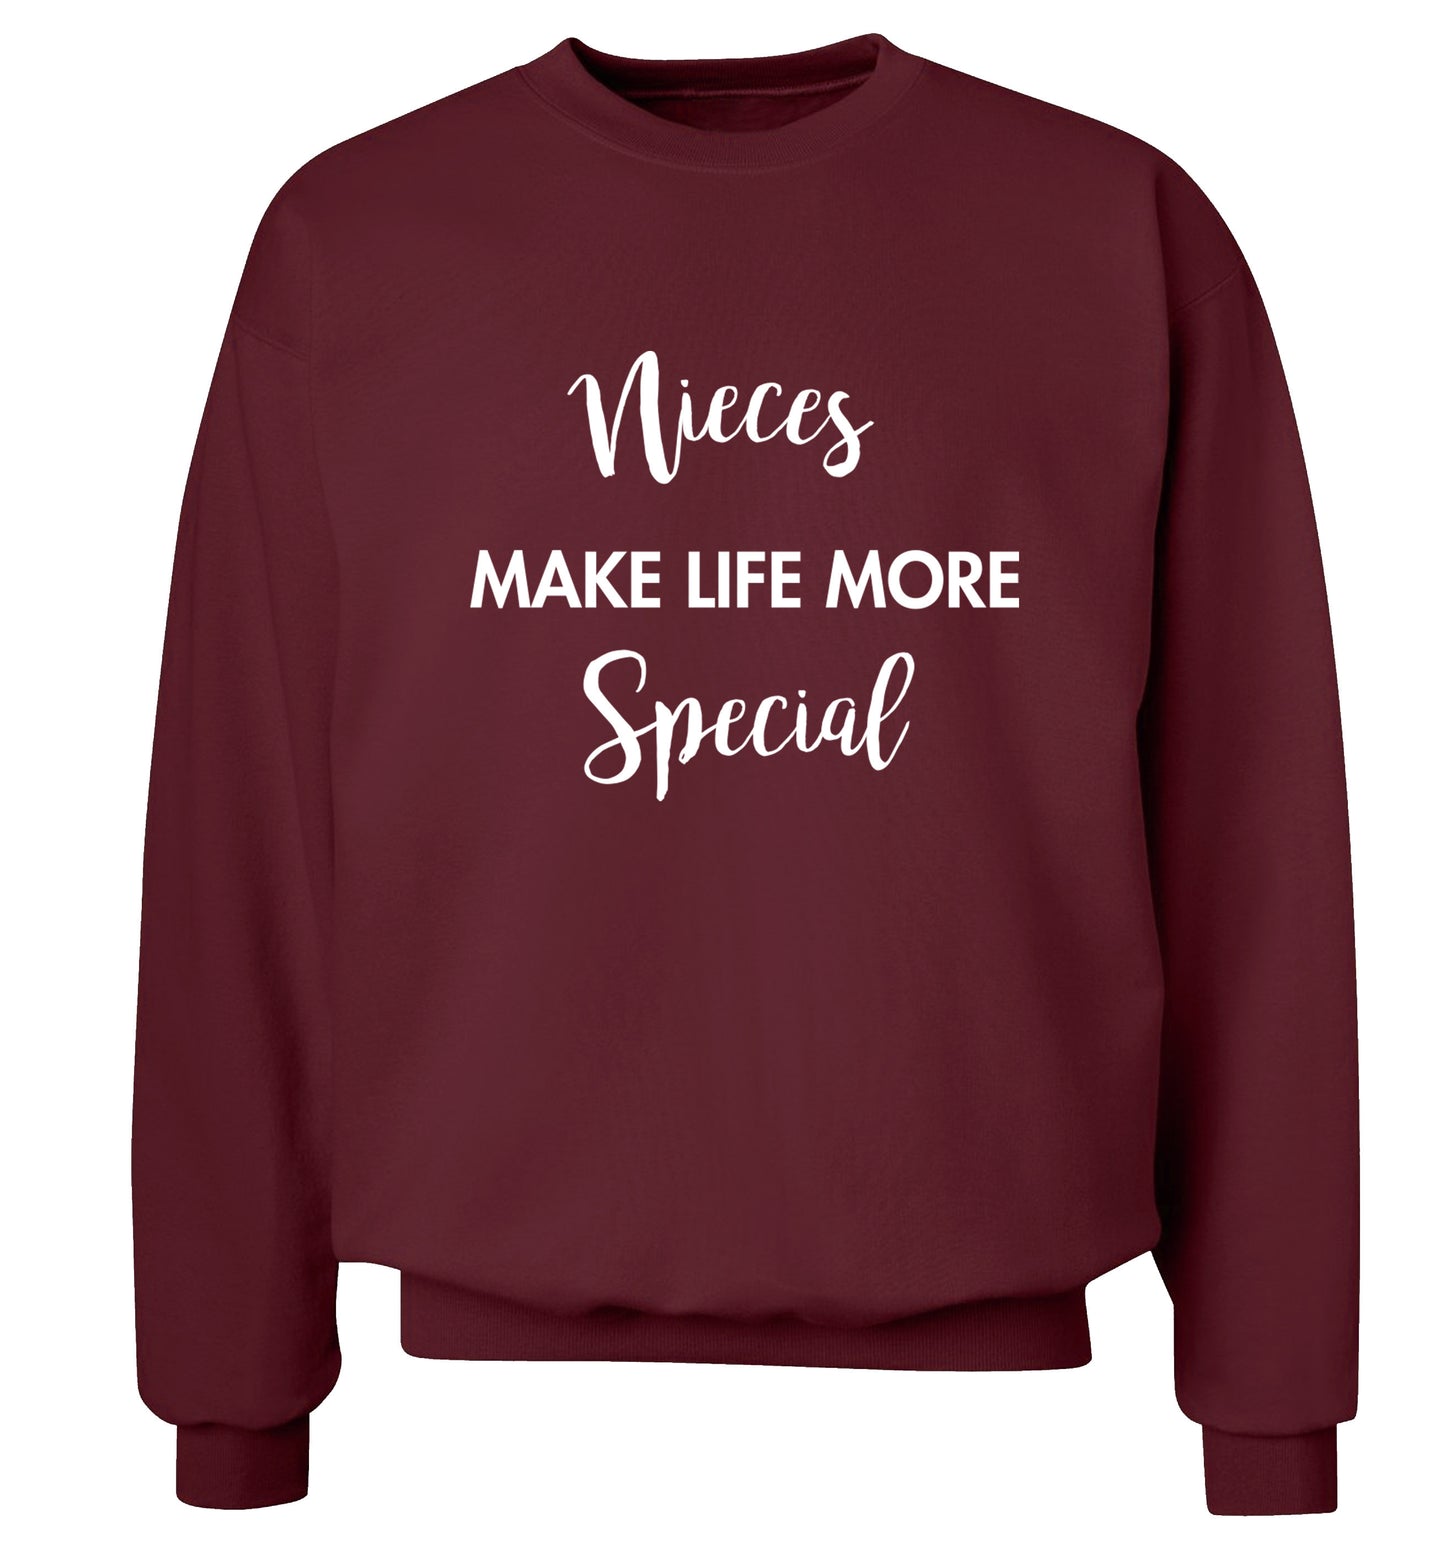 Nieces make life more special Adult's unisex maroon Sweater 2XL